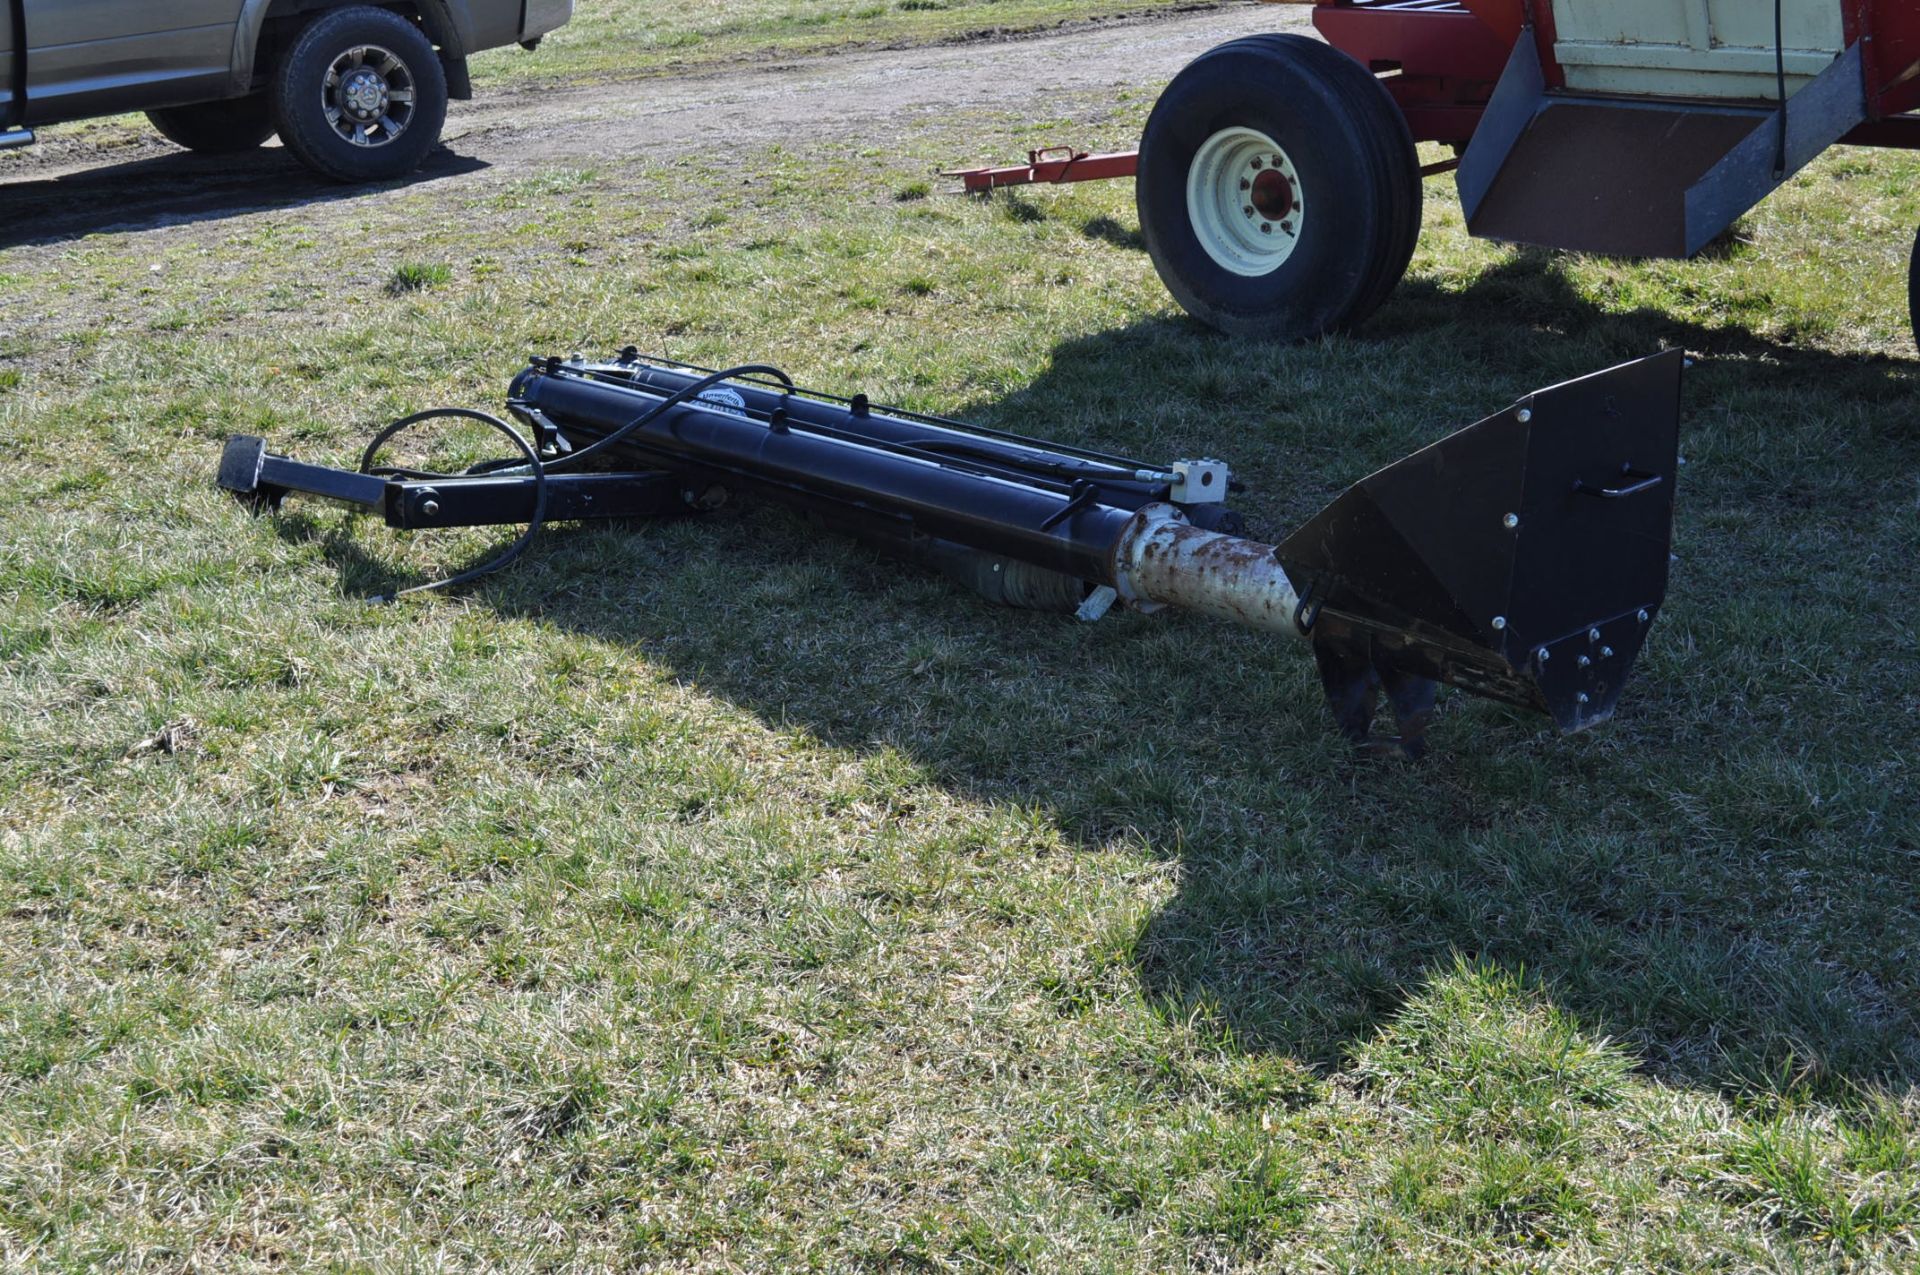 Unverferth folding seed auger, 6" steel cupped flighting, 17' long, hyd drive - Image 2 of 6